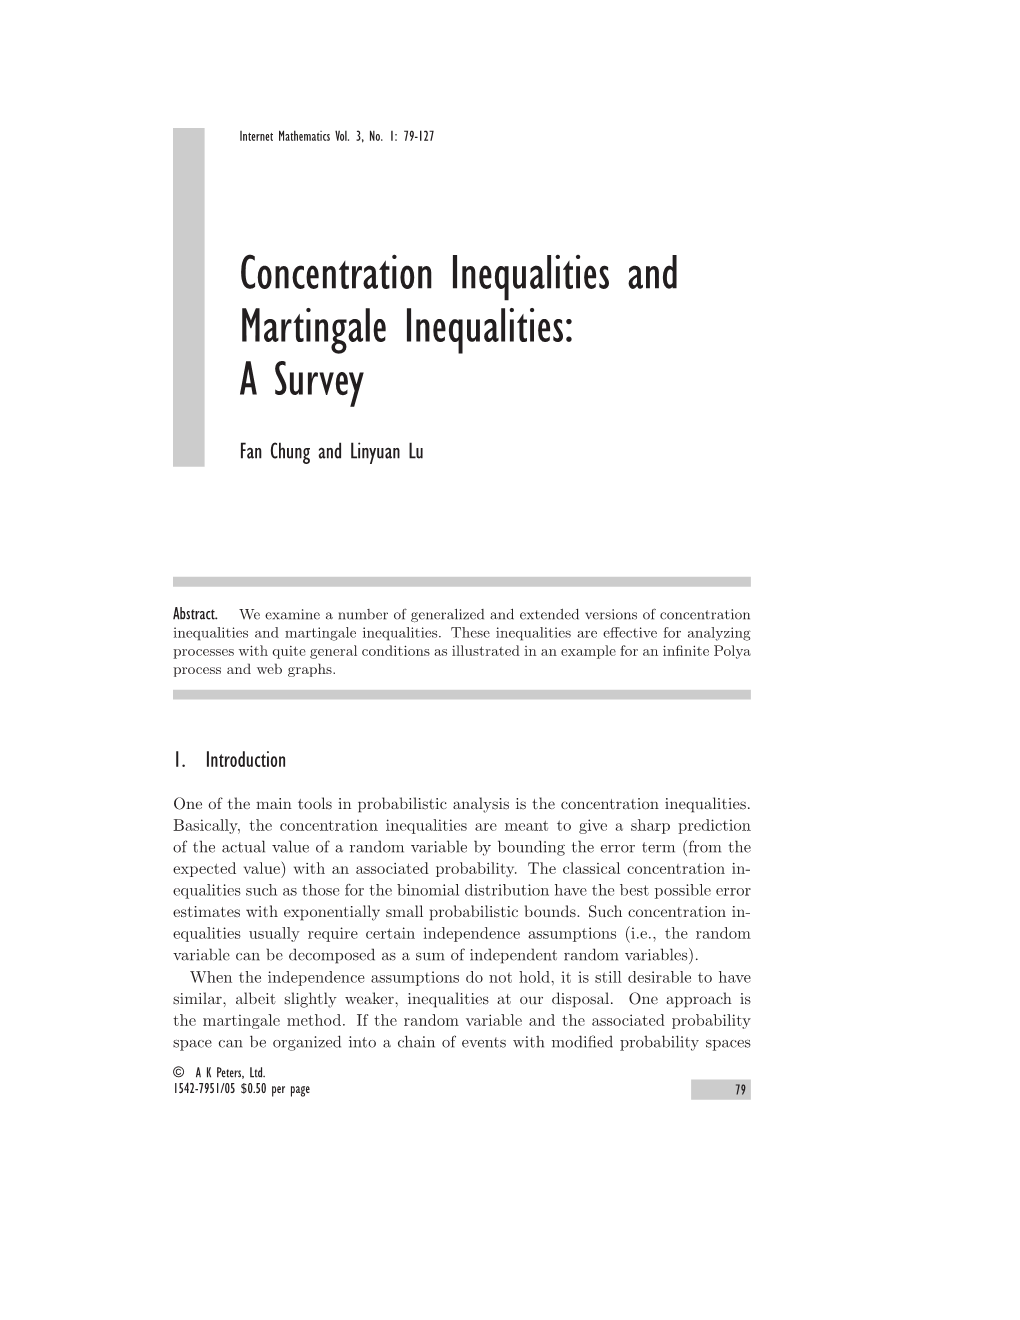 Concentration Inequalities and Martingale Inequalities: a Survey